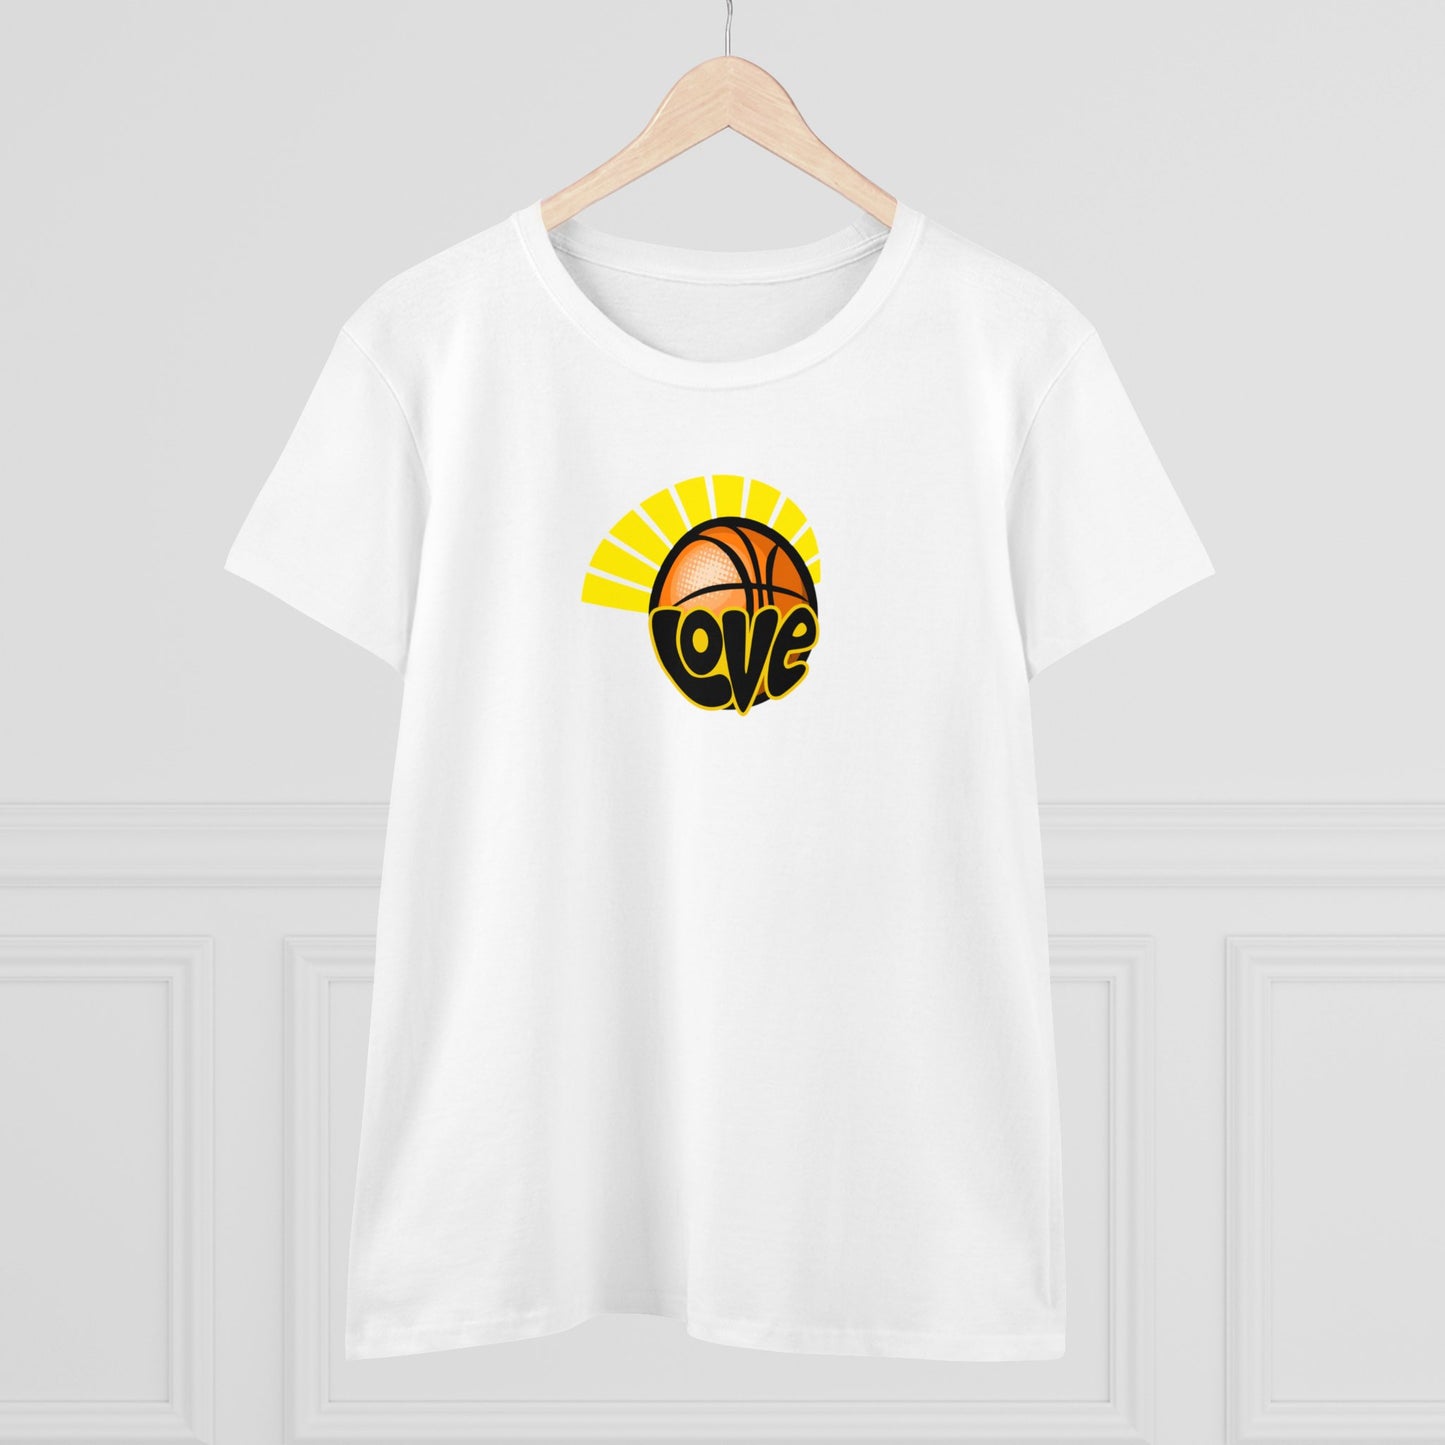 Love of Basketball, Women's Retro Hippy, Feel Good, Midweight Cotton Tee, Cute Ladies Tee, Retro 70's, Pink Basketball T-Shirts for Ladies